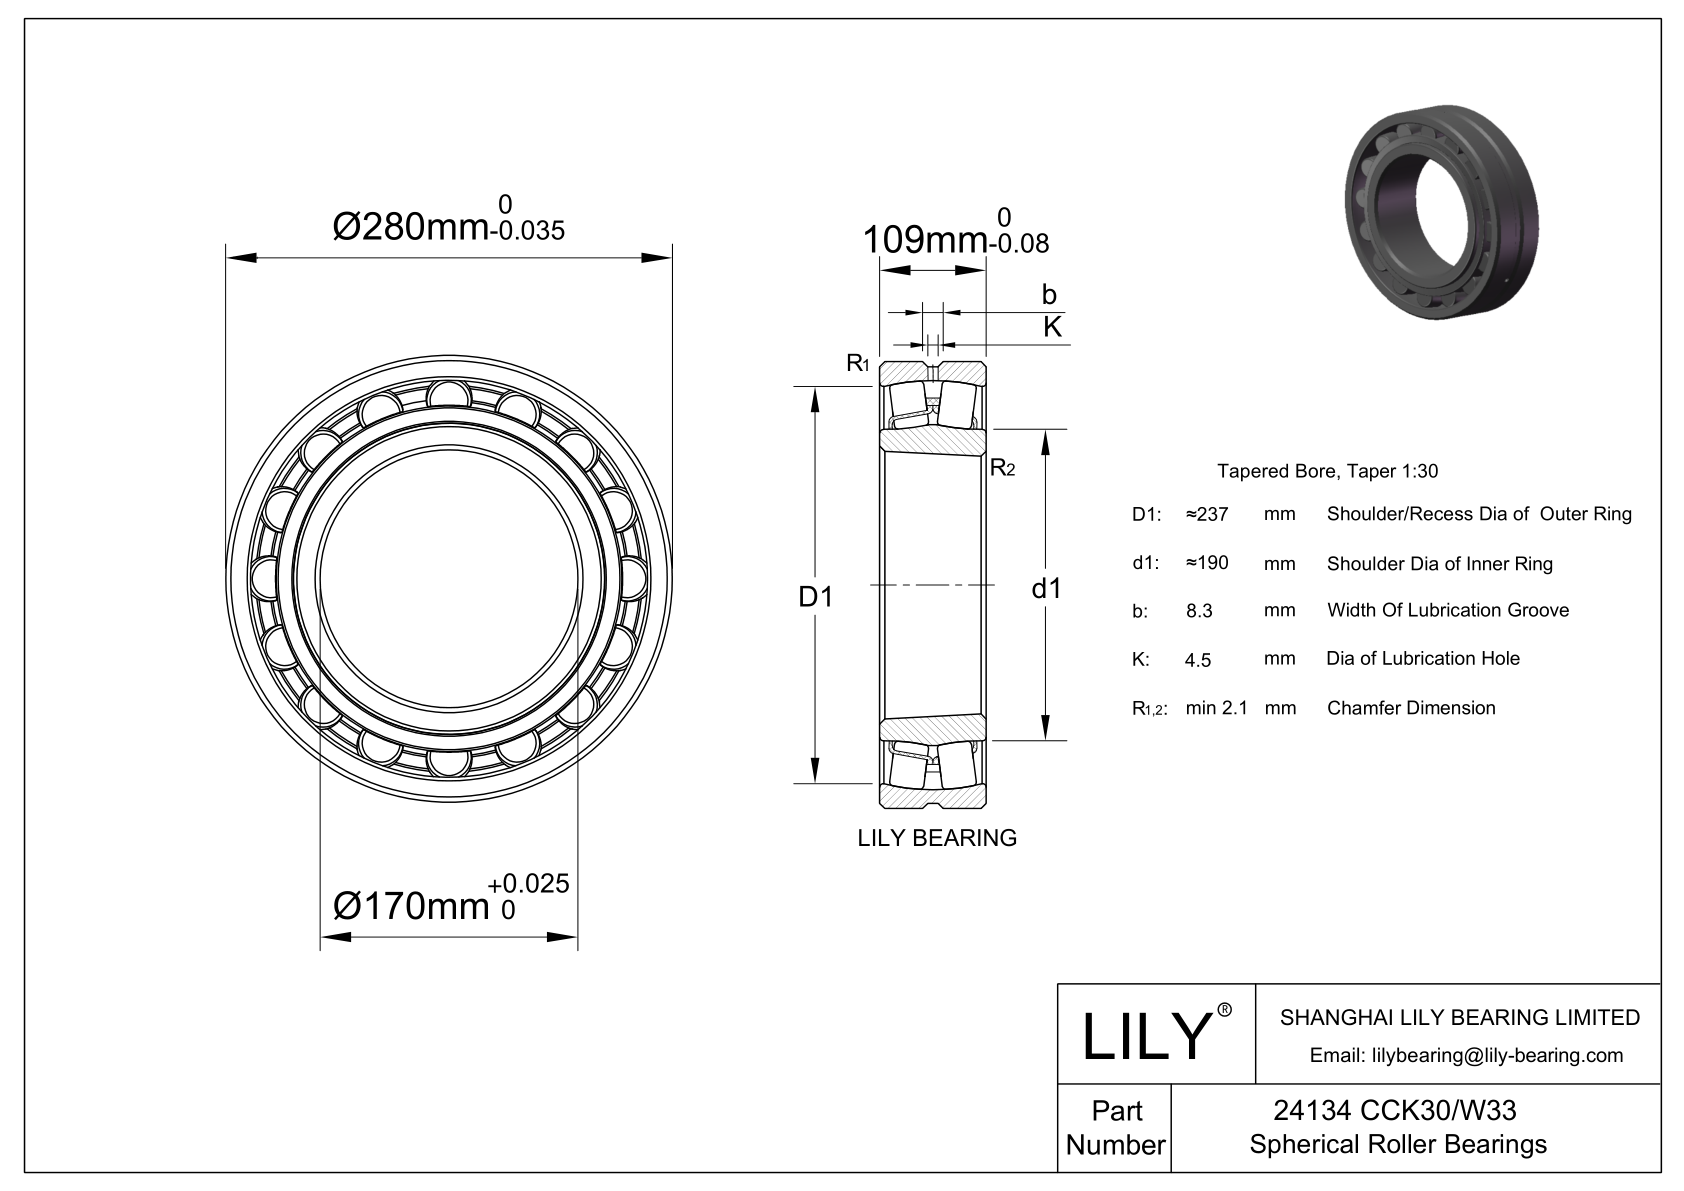 24134 CCK30/W33 Double Row Spherical Roller Bearing cad drawing